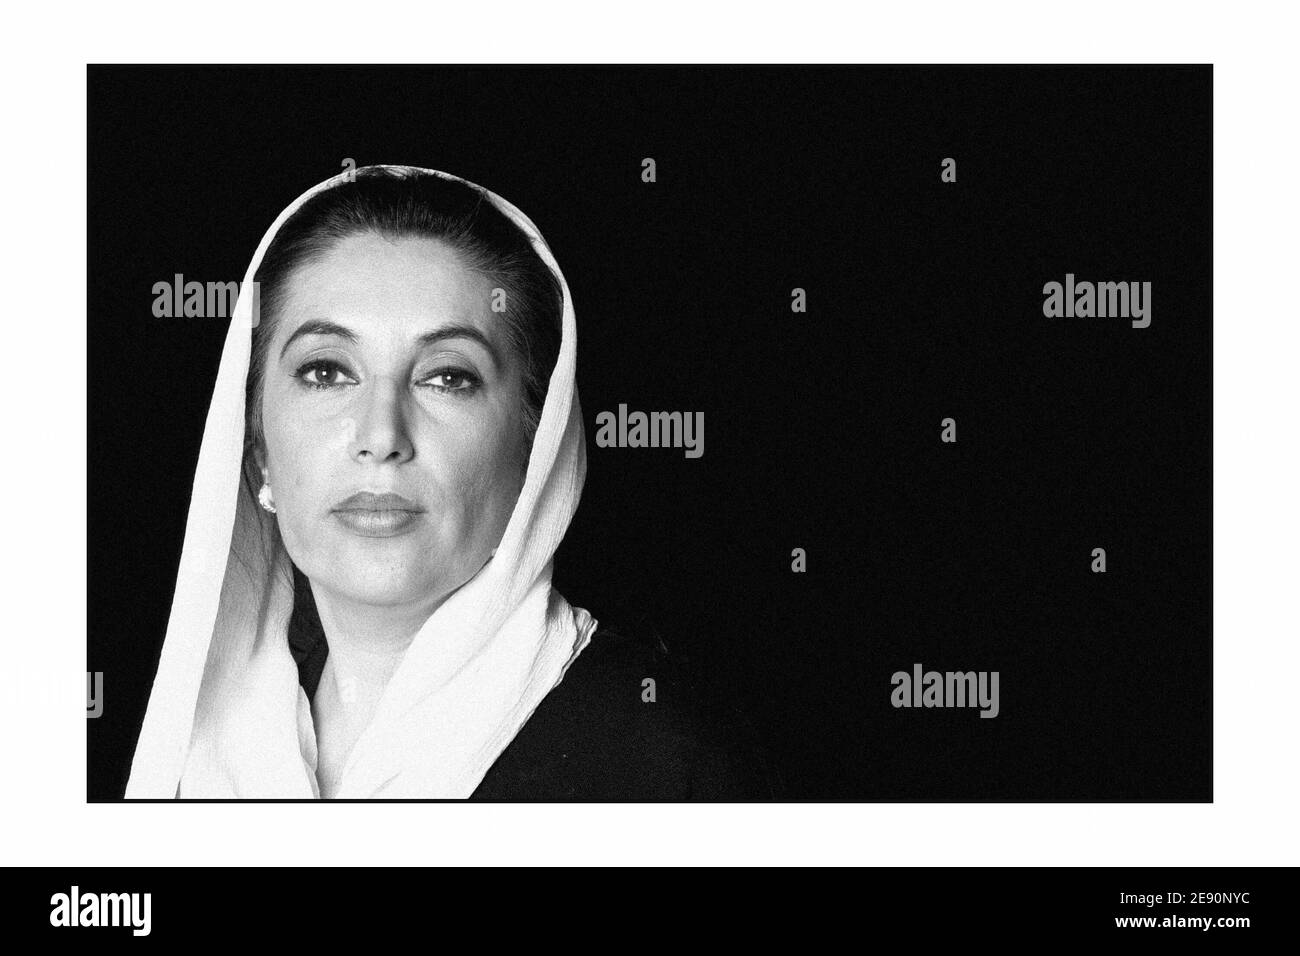 Former Pakistan's Prime Minister Benazir Bhutto, in a photo dated March 2000, in Paris, France. Benazir Bhutto was killed in Rawalpindi, Pakistan on December 27, 2007. Photo by Ammar Abd Rabbo/ABACAPRESS.COM Stock Photo